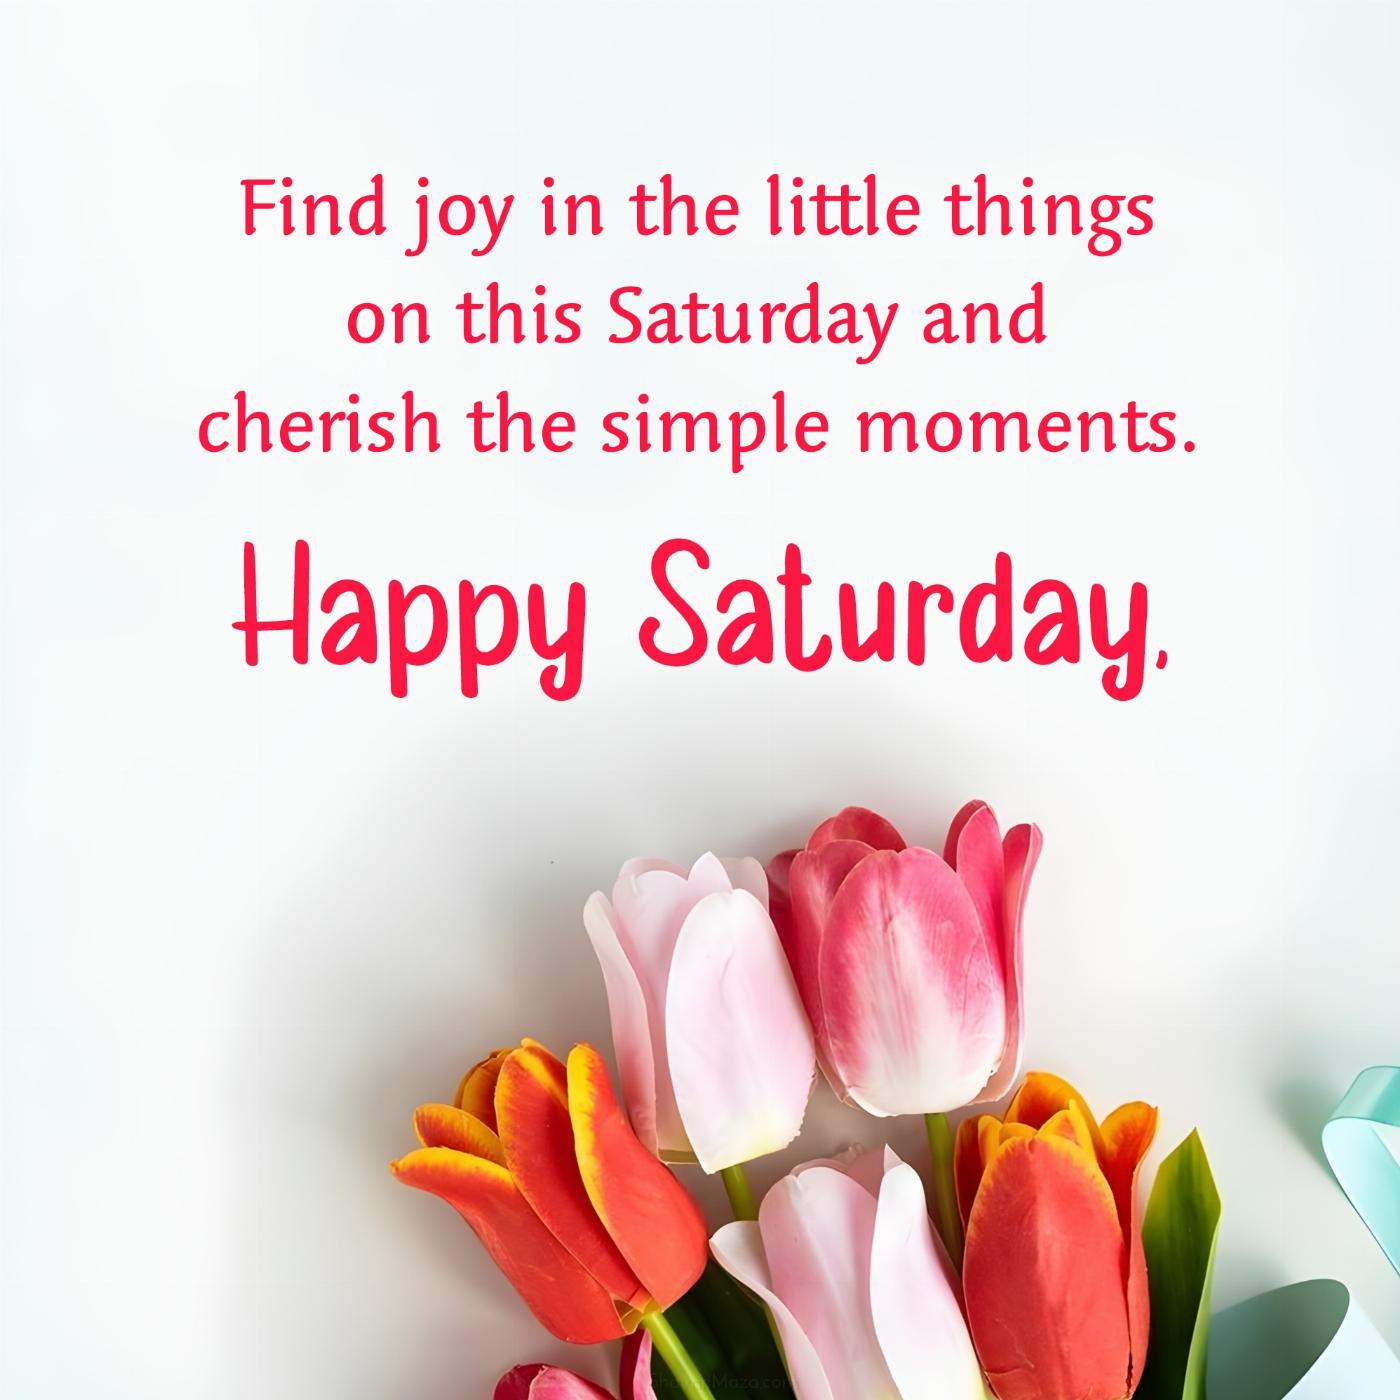 Find joy in the little things on this Saturday